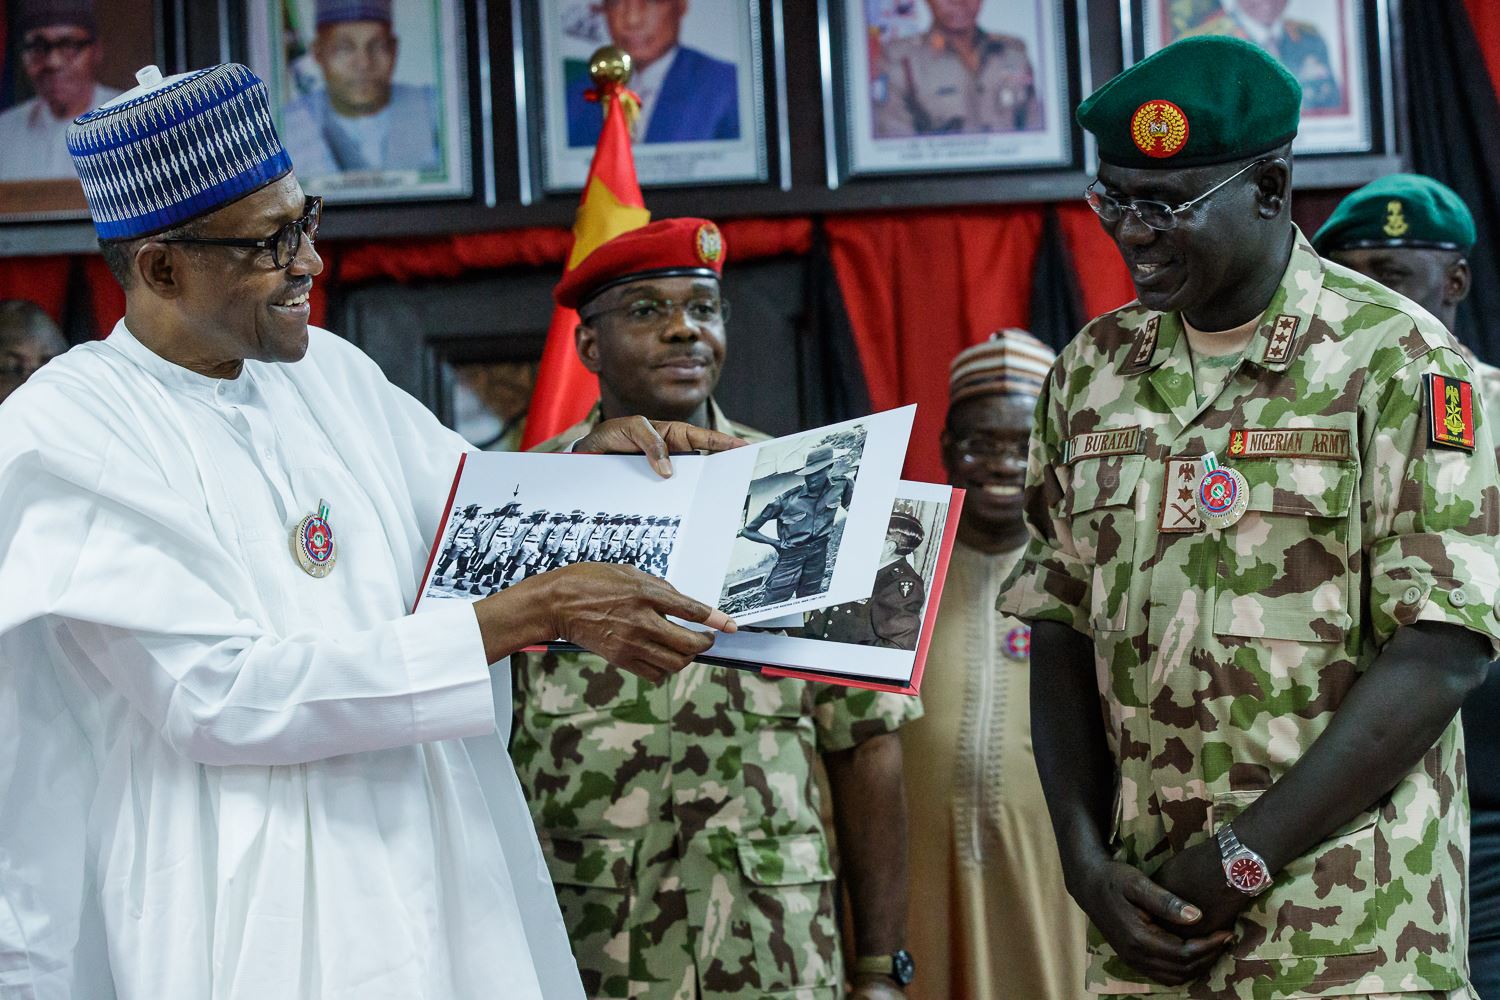 President Buhari in Maiduguri Borno State to declare Open Chief of Army Staff Conference, Address Troops and Visits Wounded Soldiers on 28th Nov 2018 | State House Photo